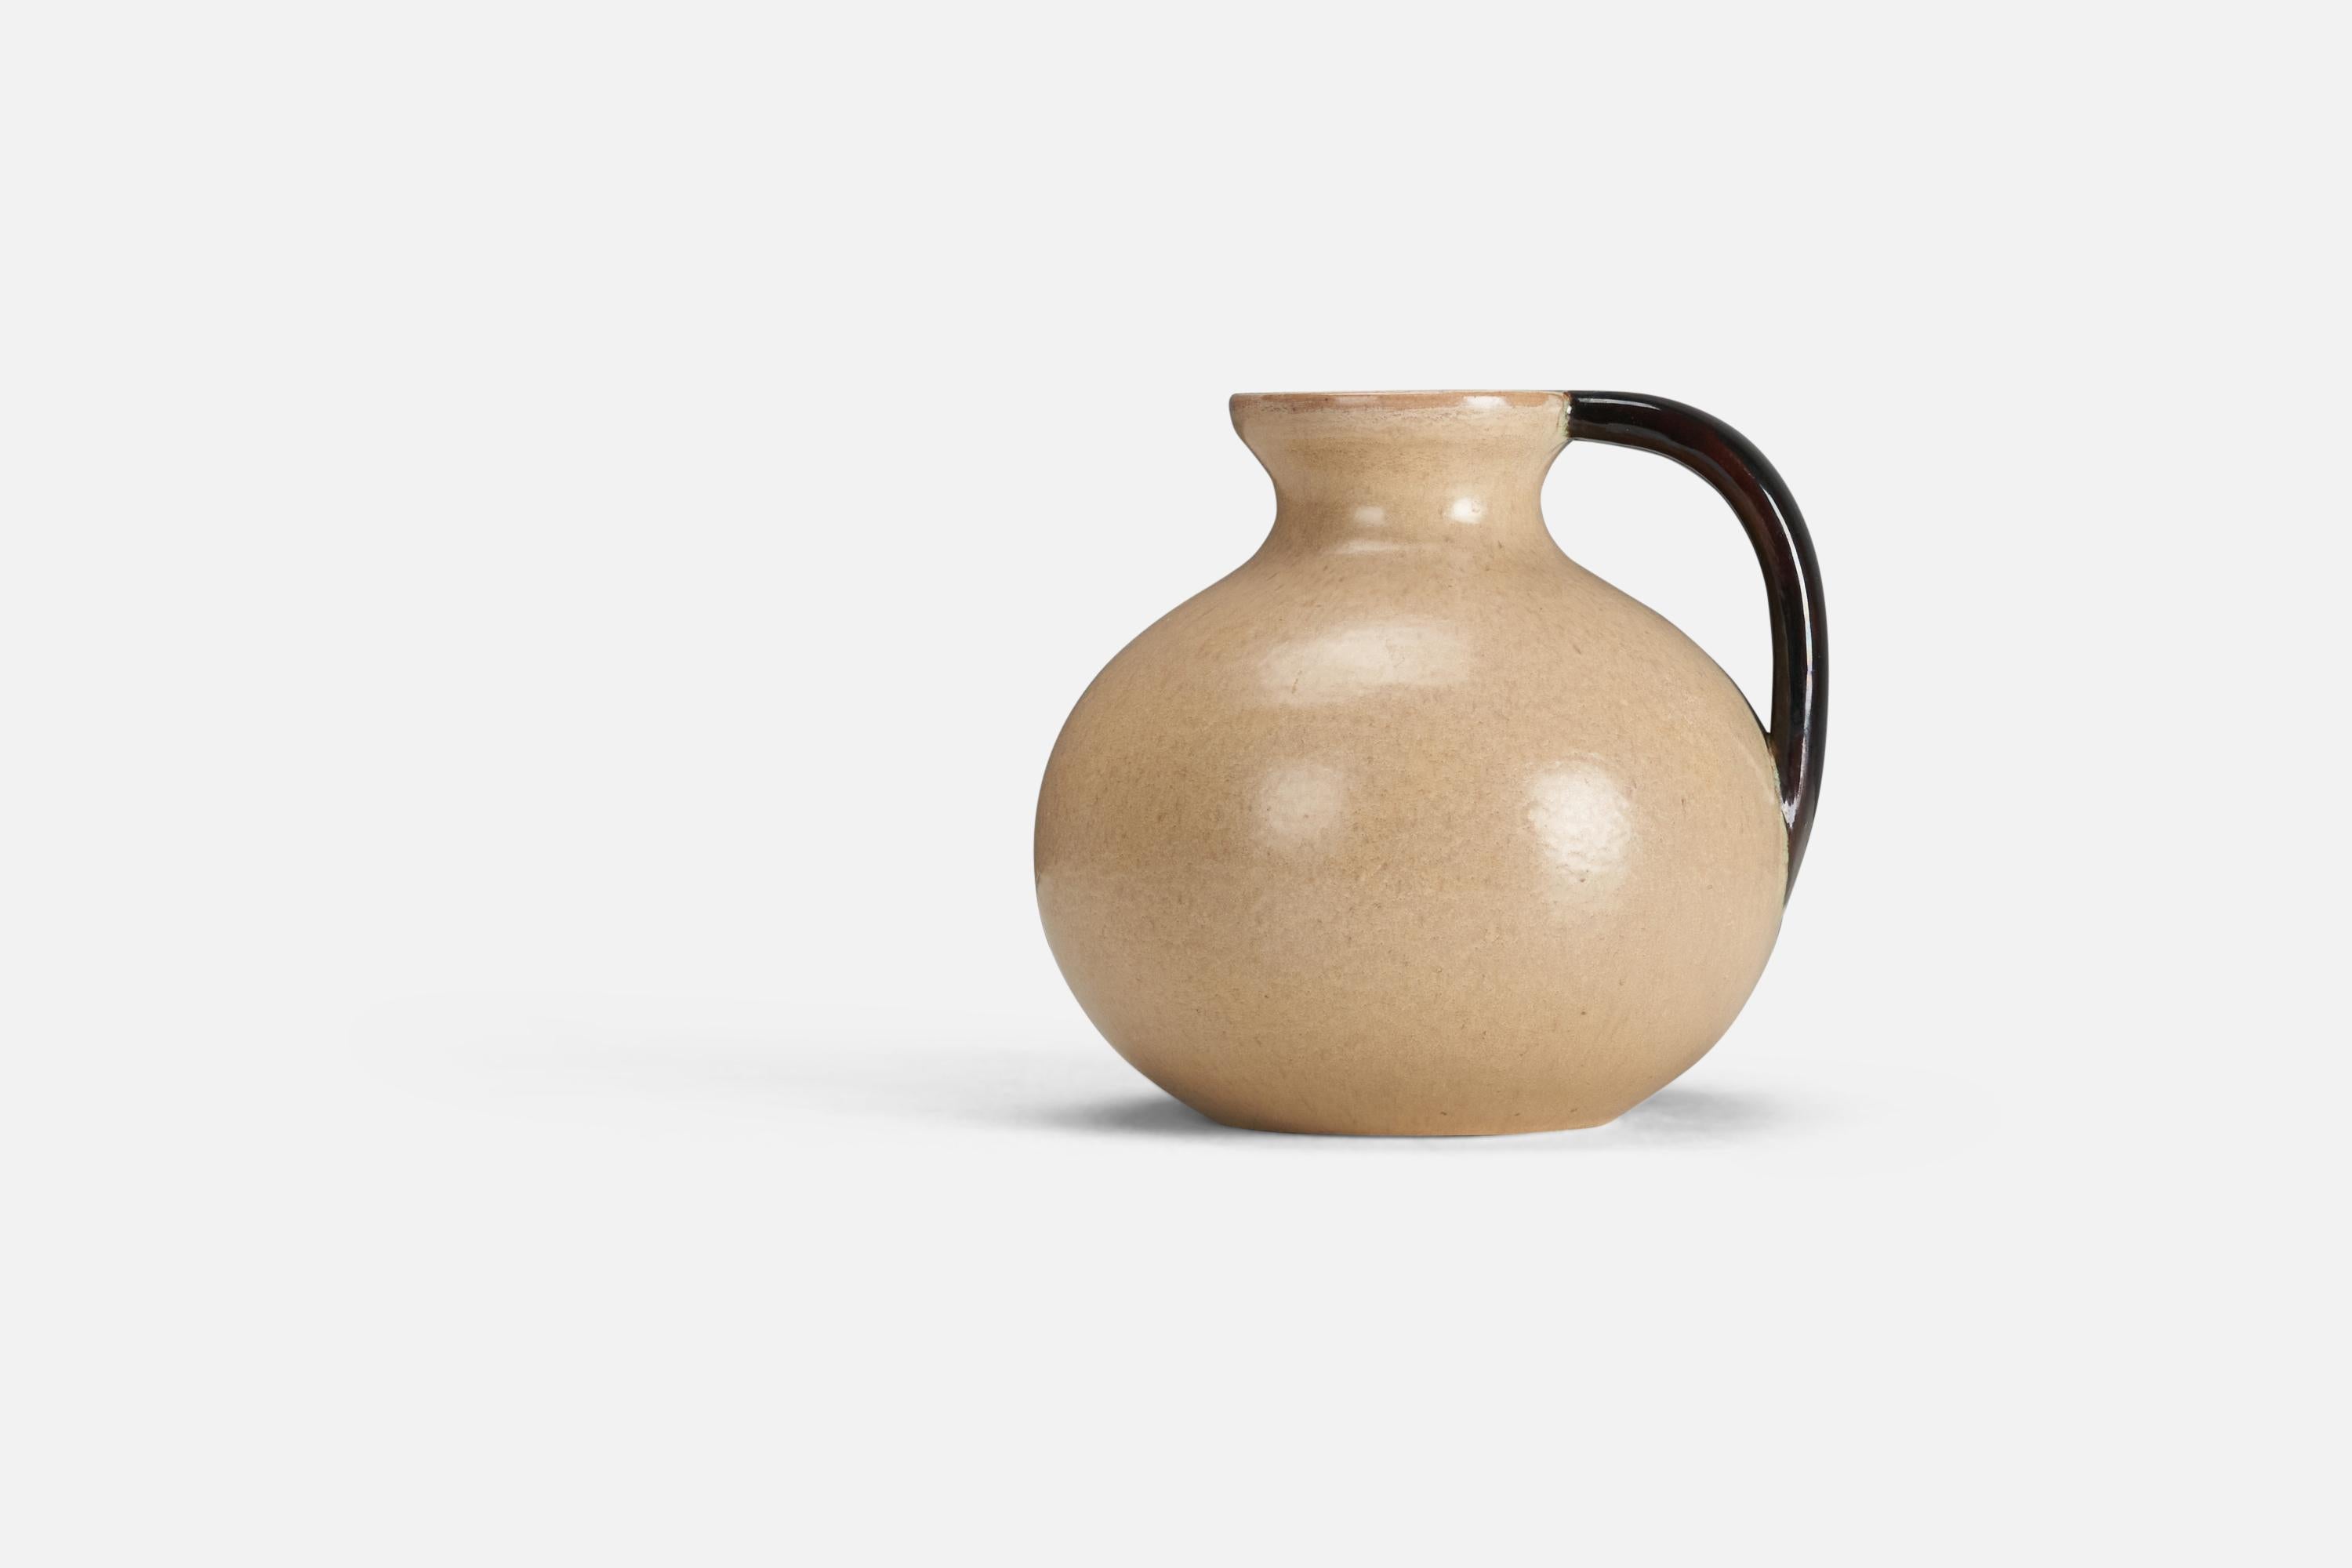 A stoneware vase or pitcher designed by Andersson & Johansson and produced in Höganäs, Sweden, 1940s.